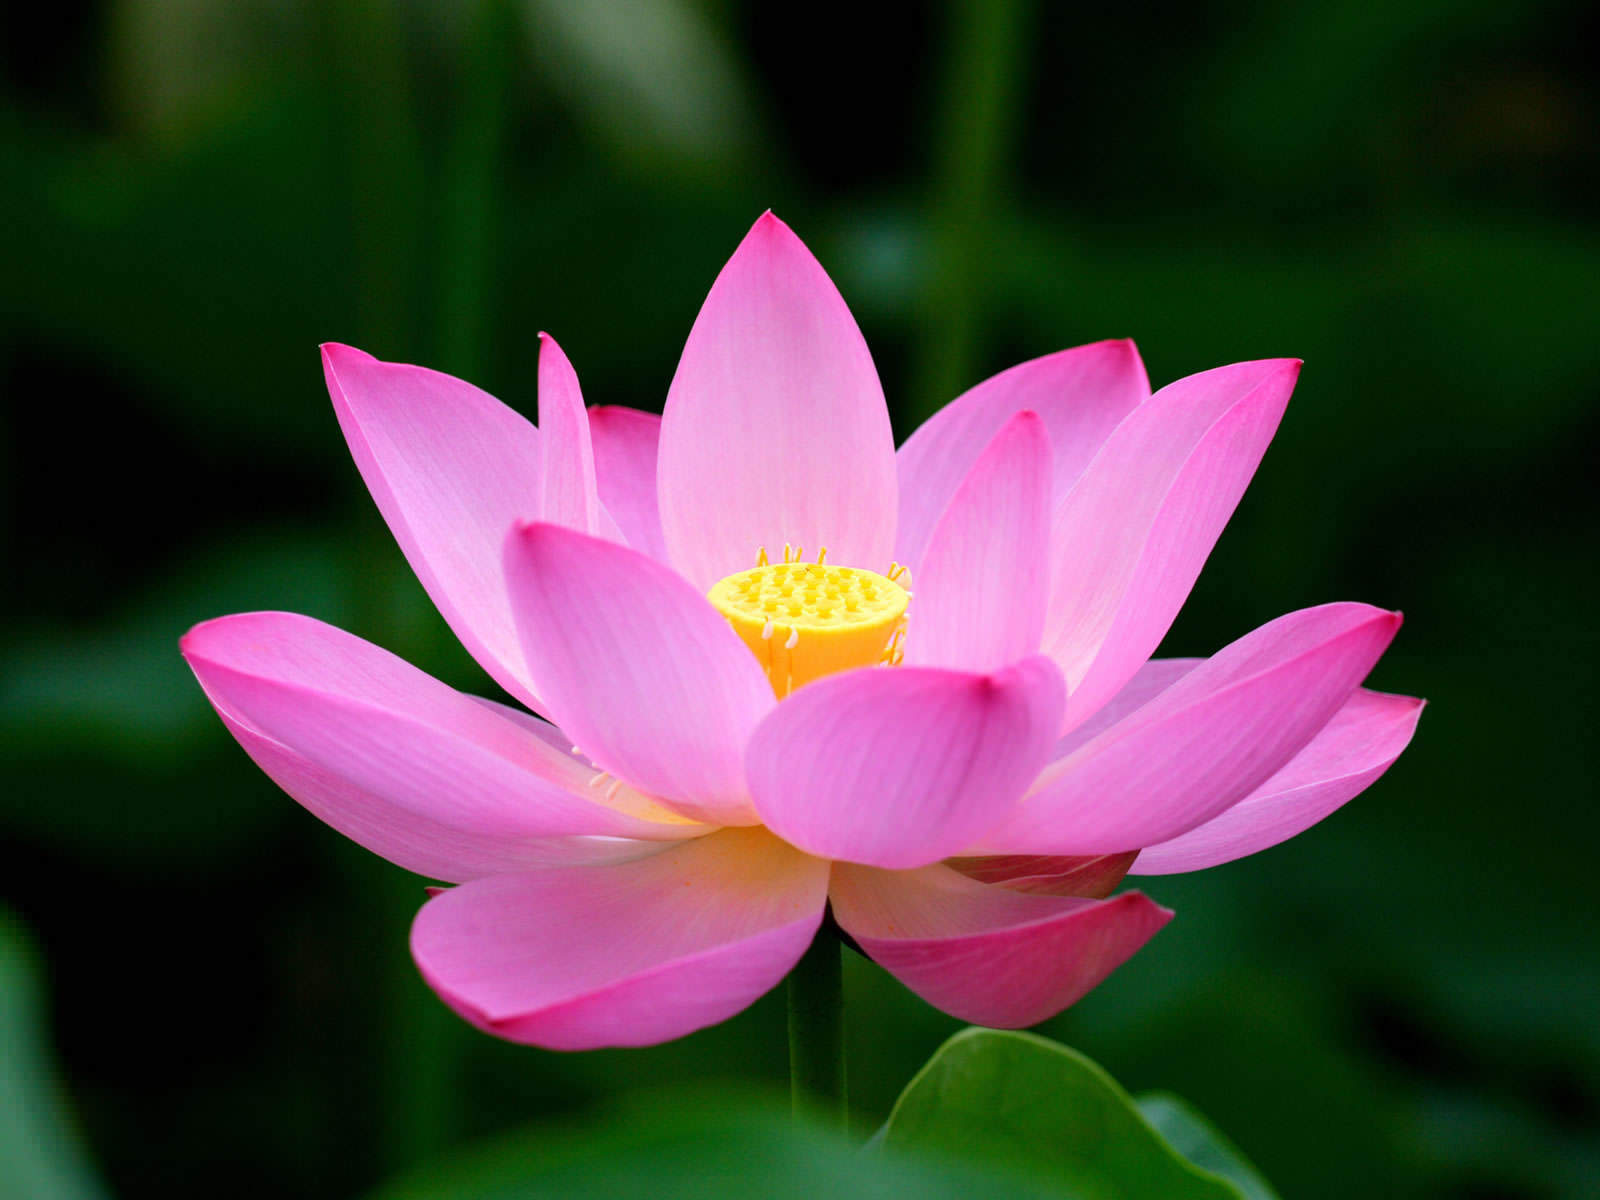 Wallpaper Flower Lotus Along With Other Character Desktop